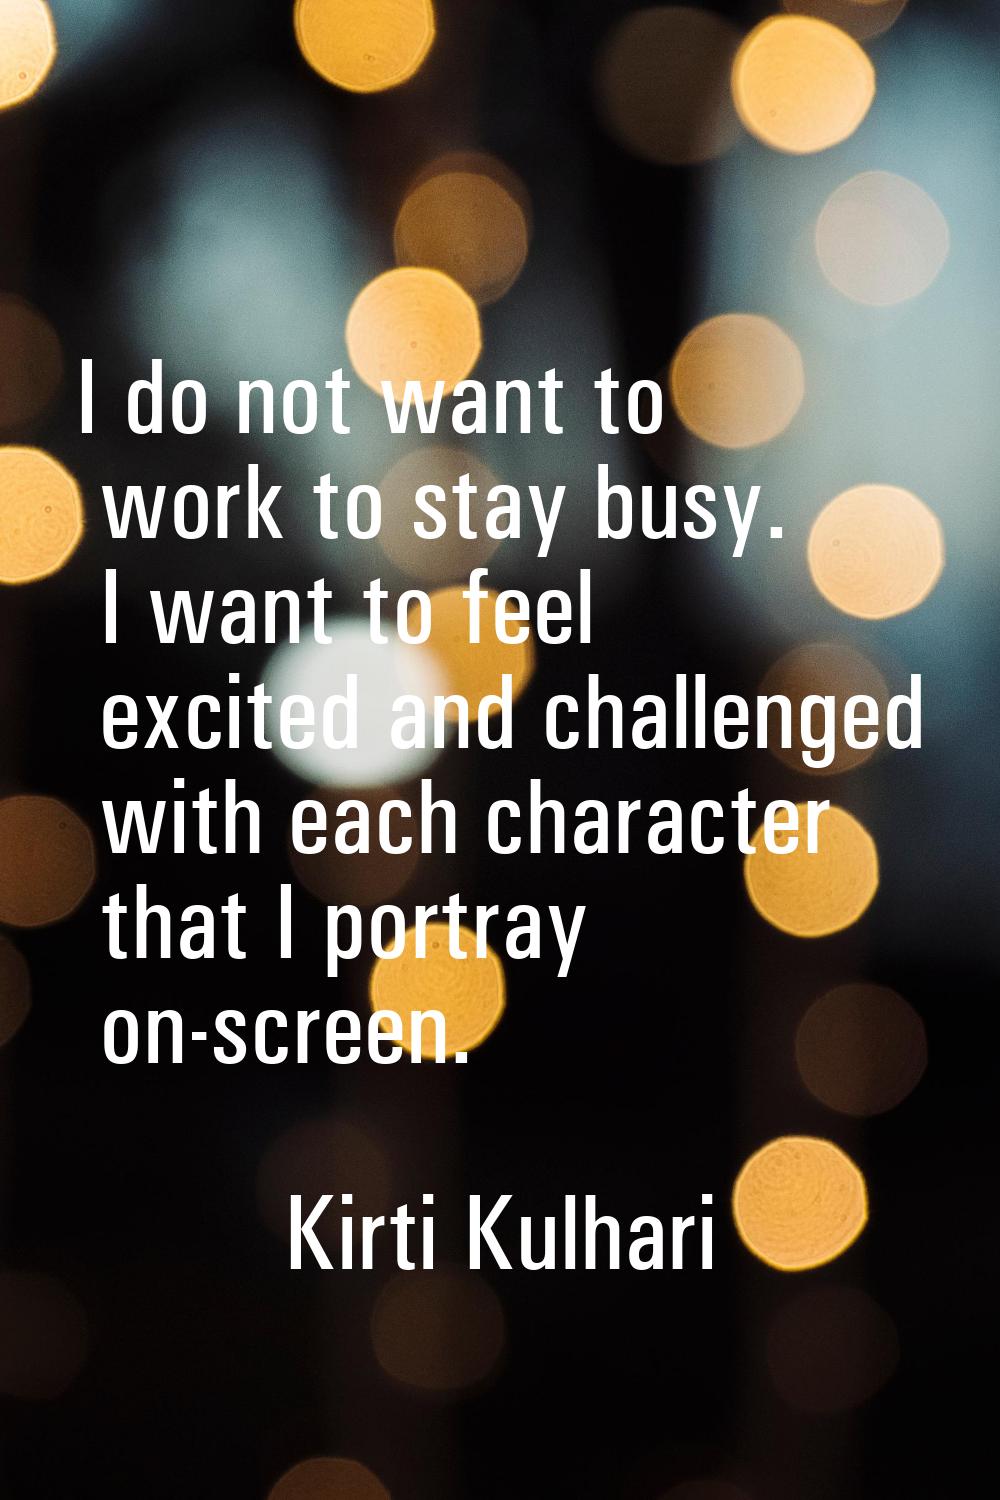 I do not want to work to stay busy. I want to feel excited and challenged with each character that 